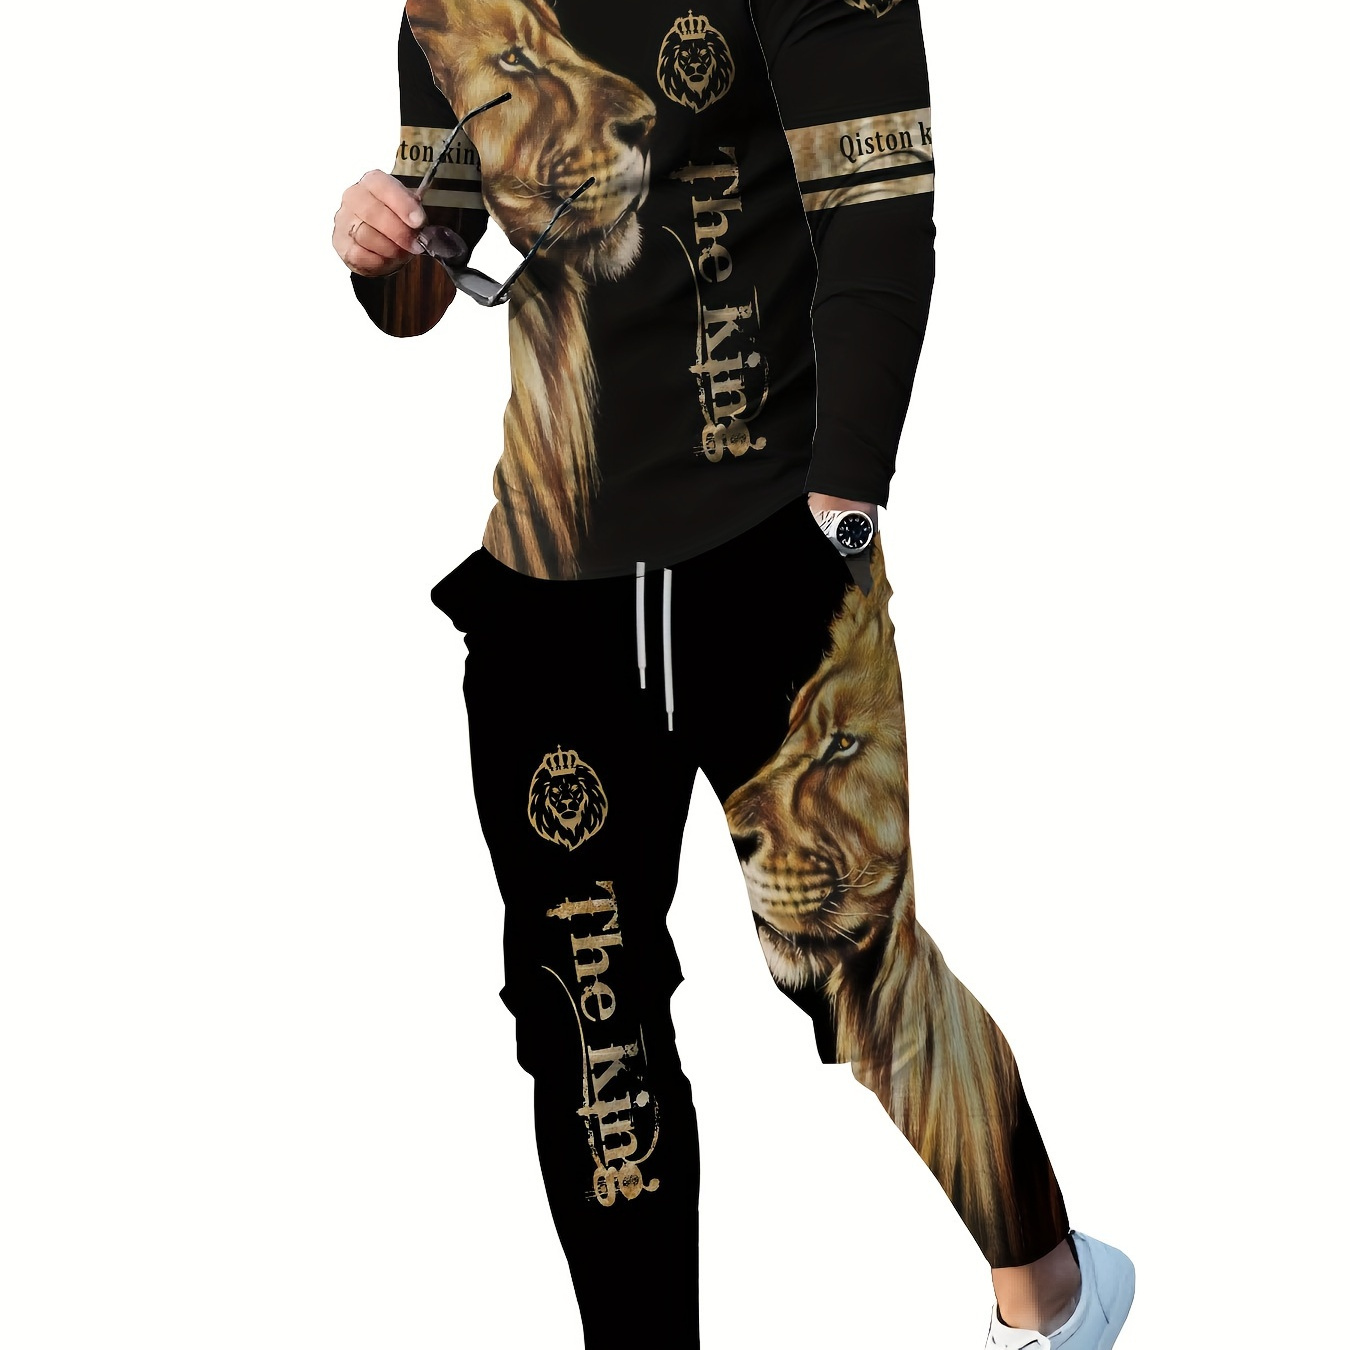 

Men's Casual Pajamas Sets, Lion Graphic Print Long Sleeve Crew Neck Sweatshirt Top & Loose Sweatpants Trendy Trousers With Pocket Drawstring Elastic, Outdoor Sets For Spring Autumn